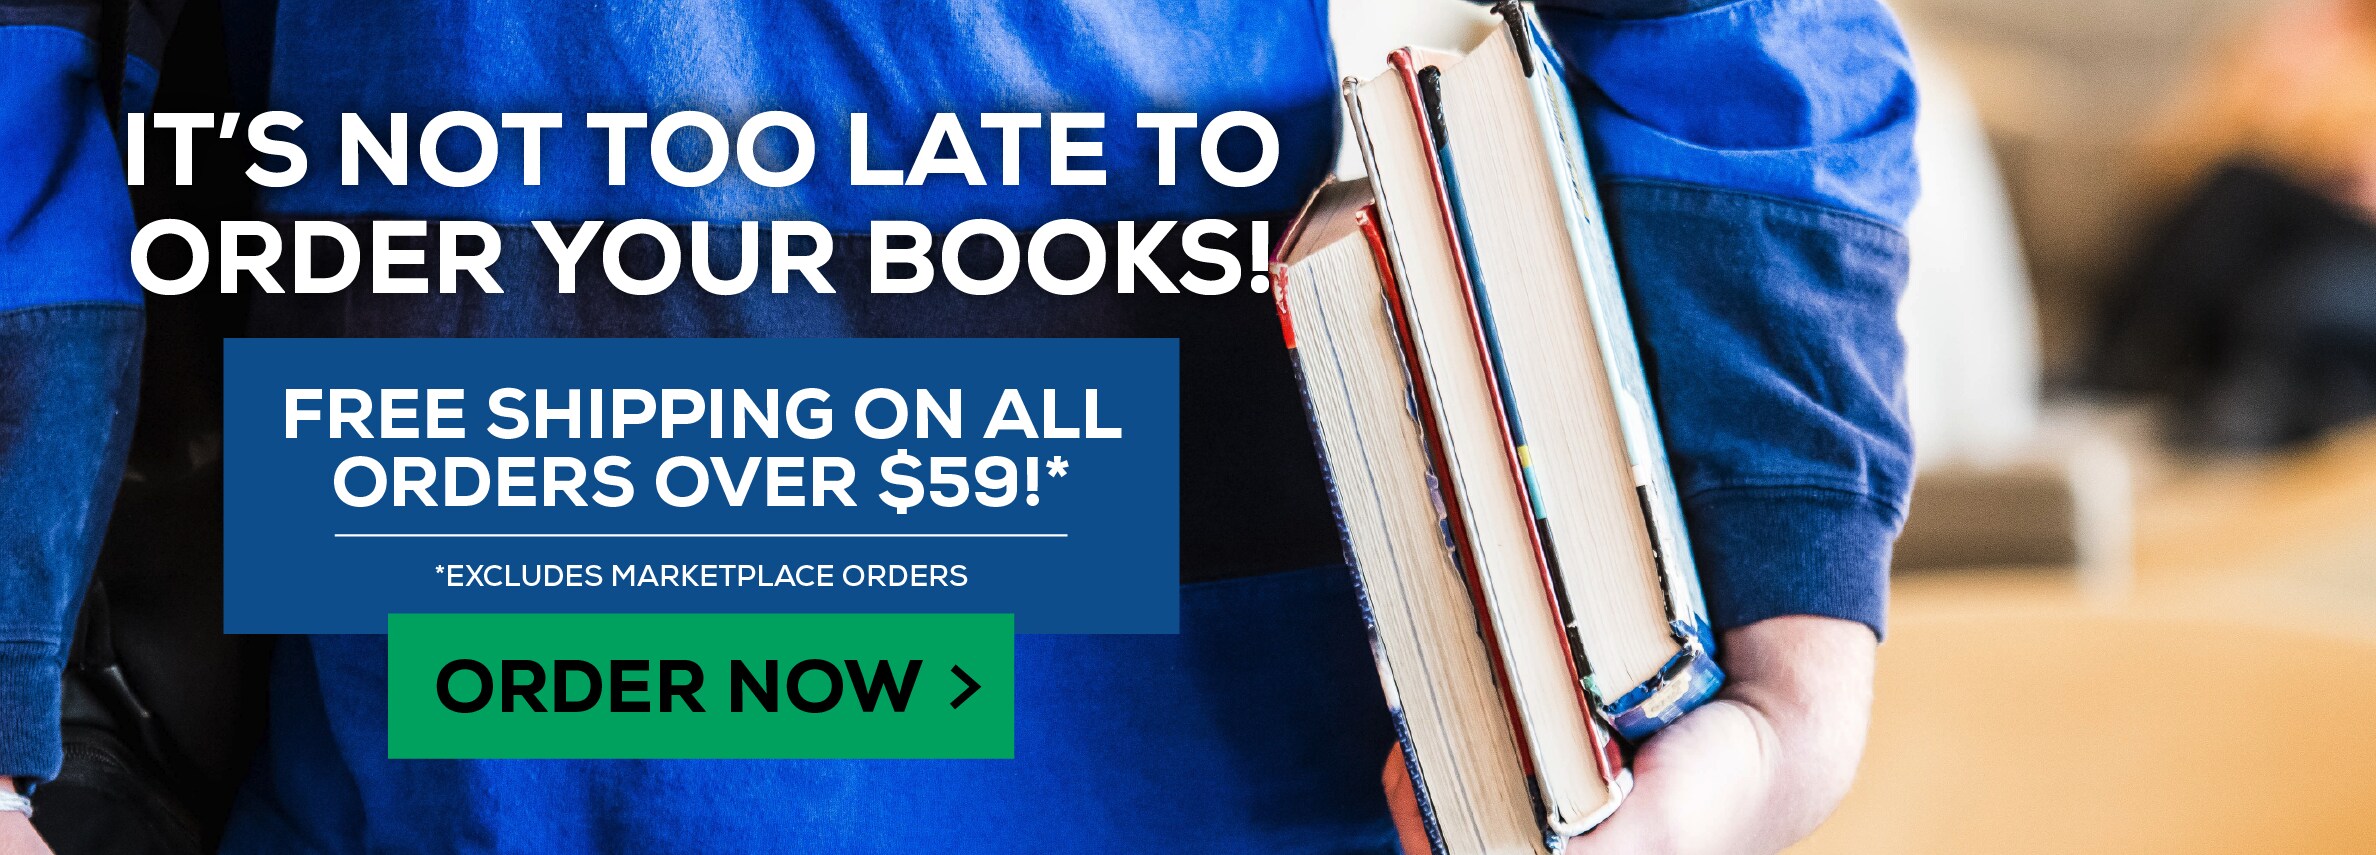 It's not too late to order your textbooks! Free shipping on all orders over $59.* Excludes Marketplace Purchases. Order now